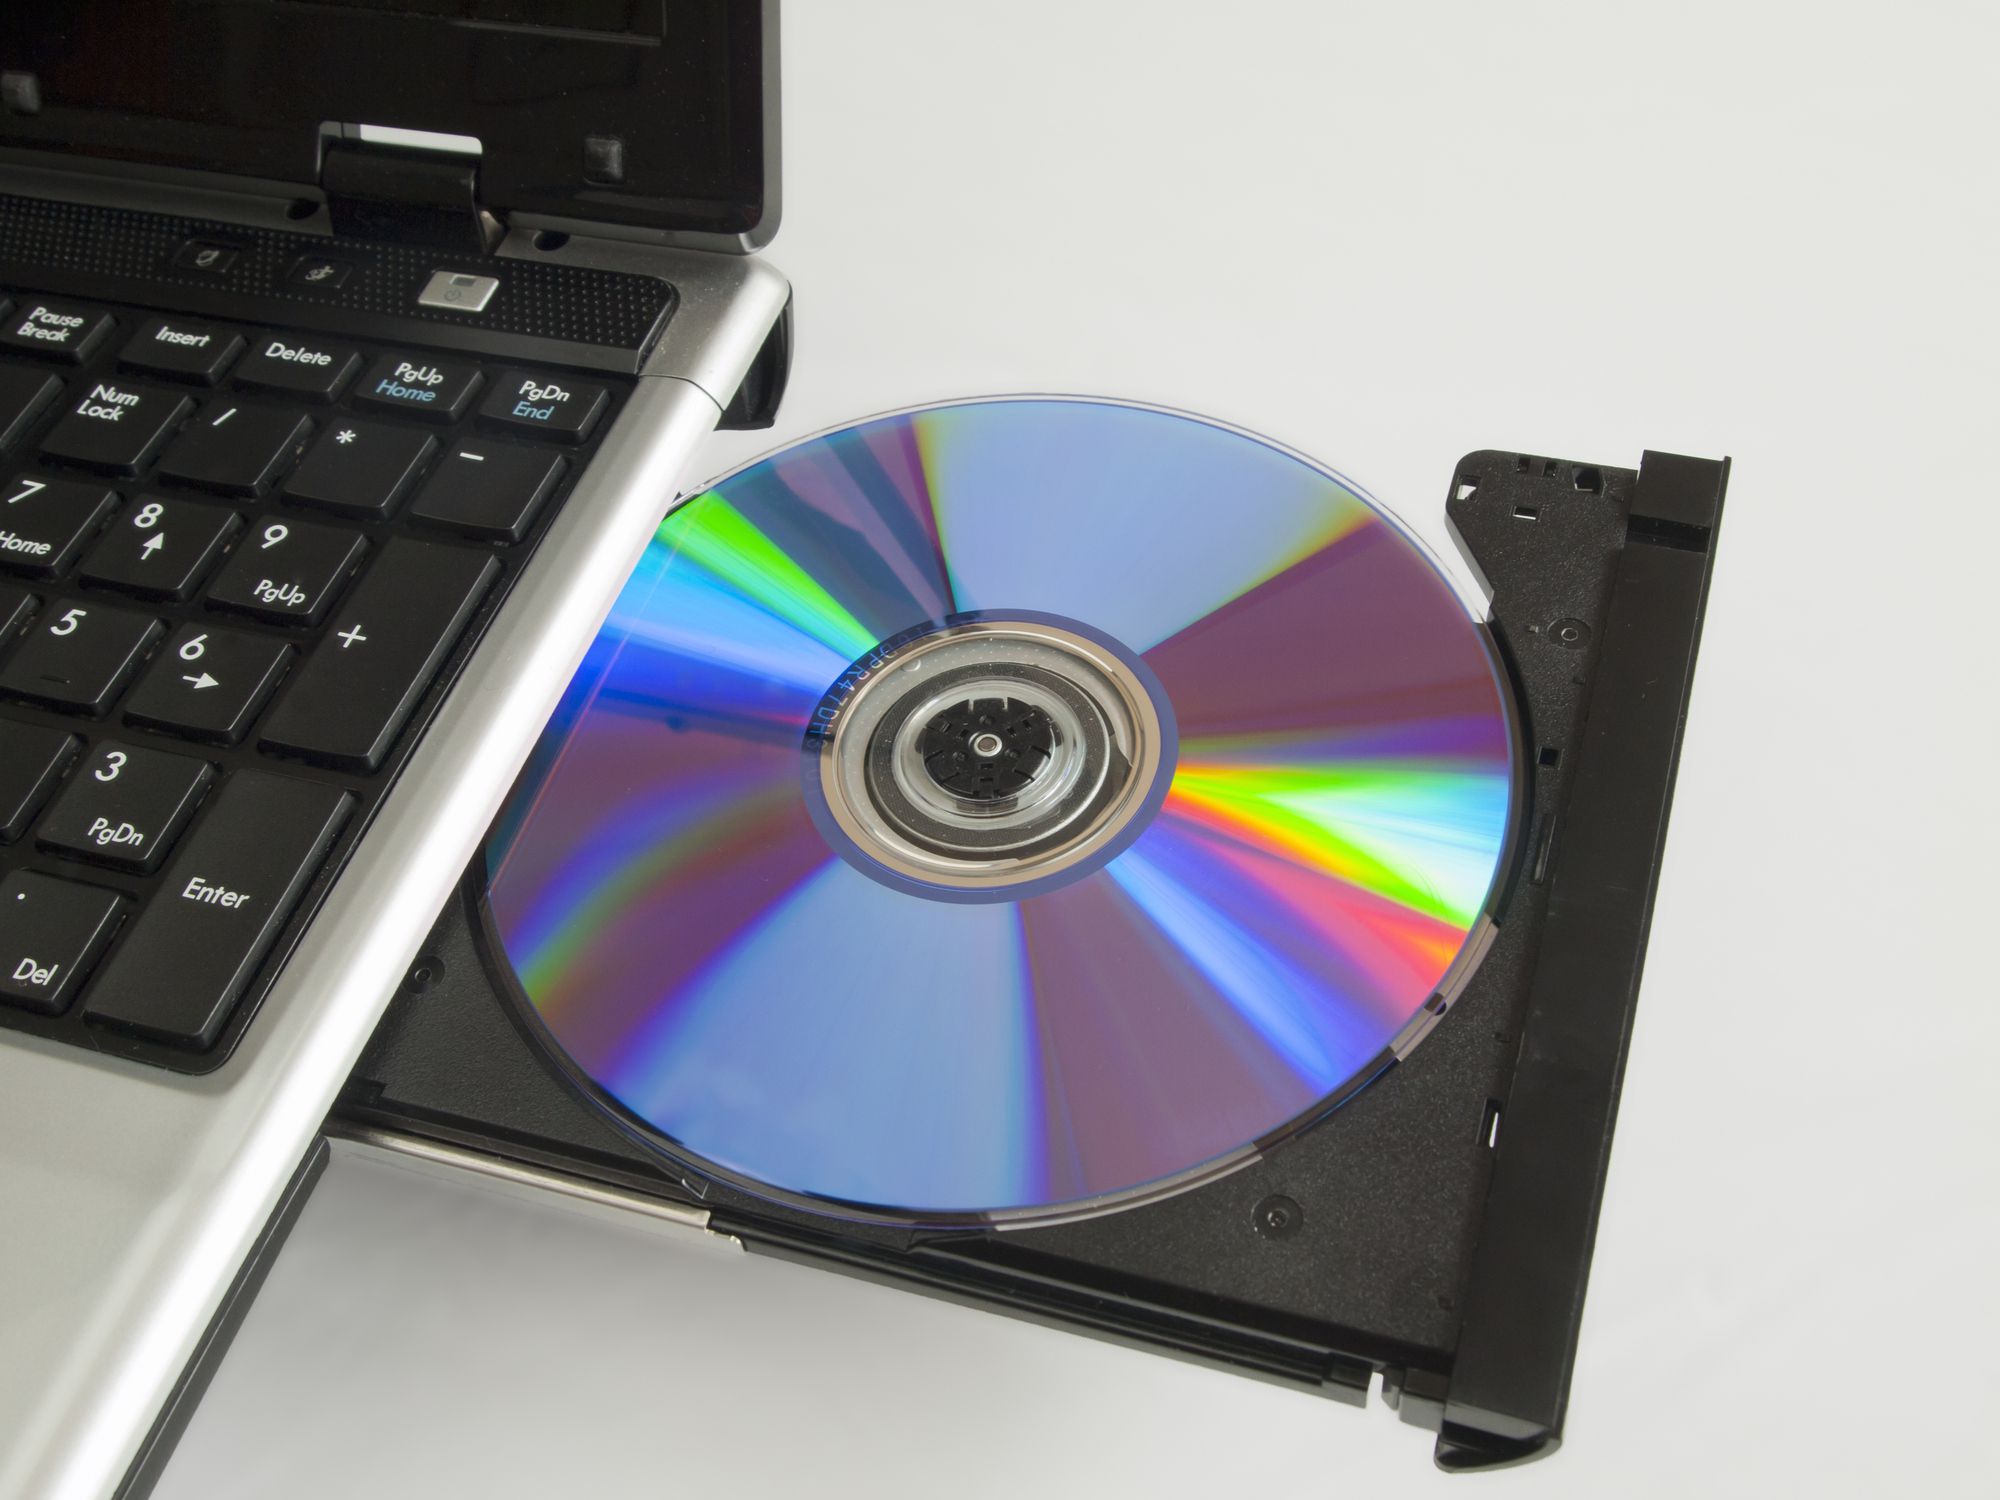 What Is the MP3 Capacity of a CD?